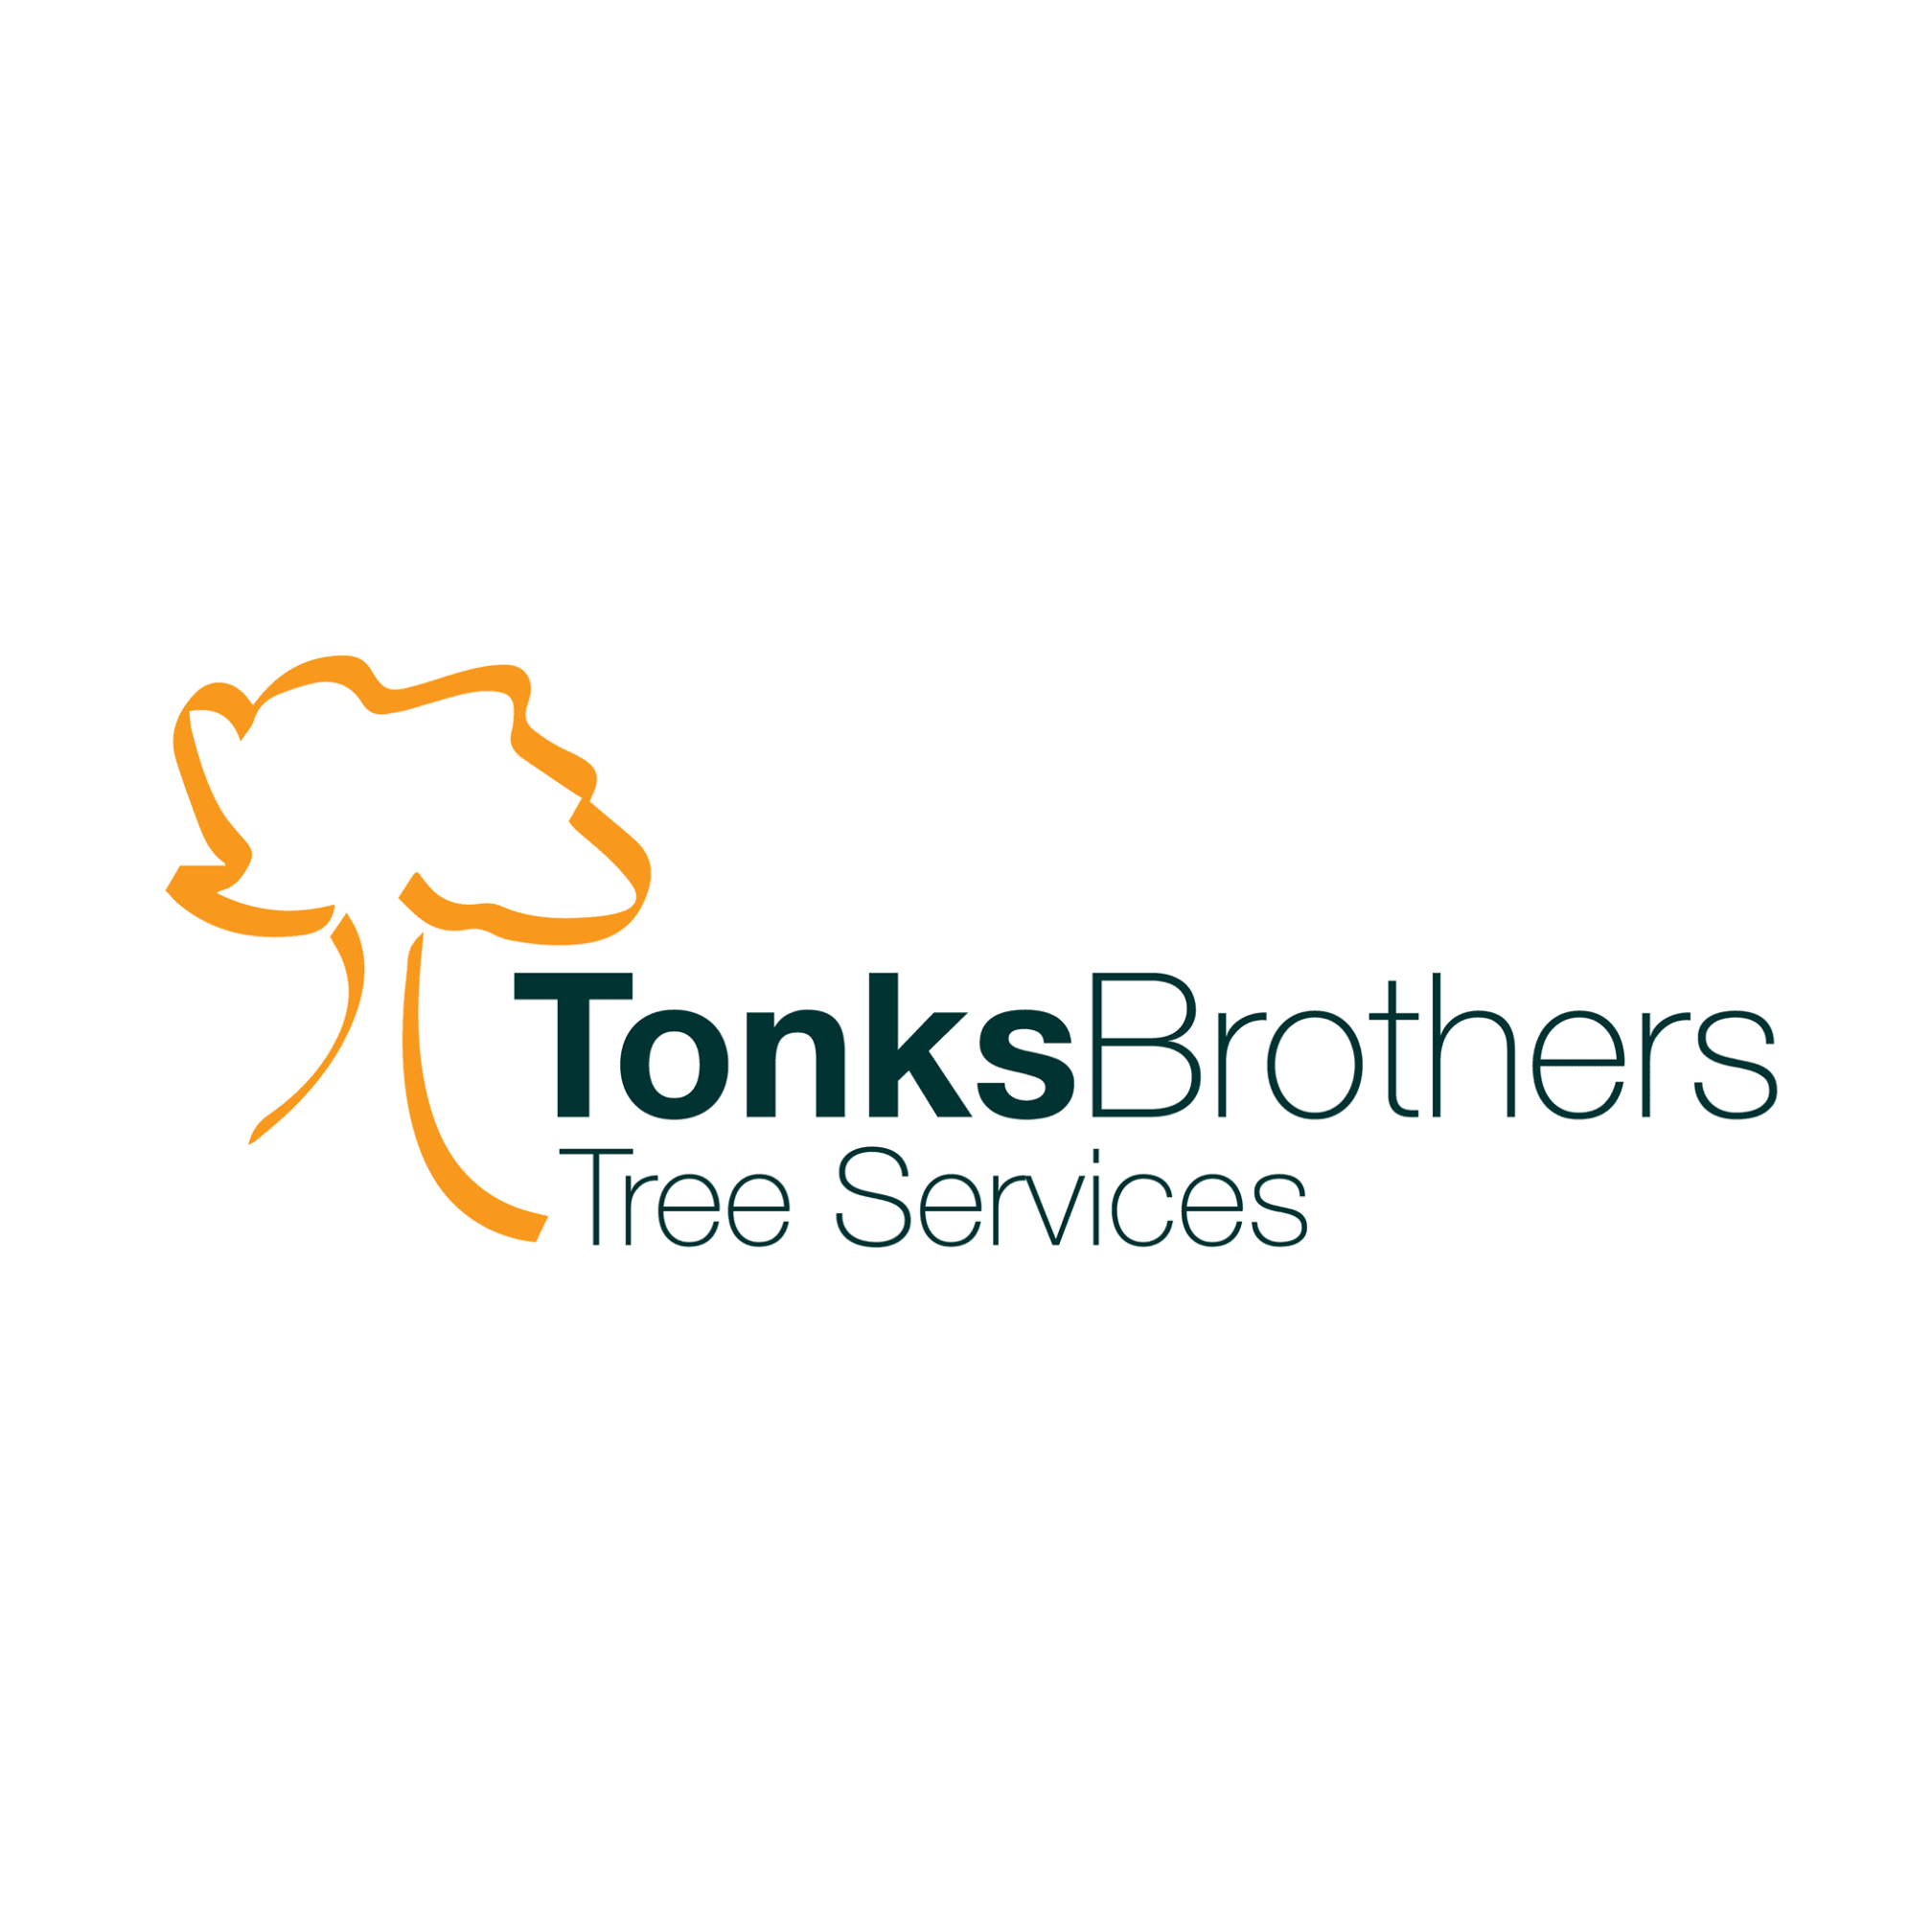 Tonks Brothers Tree Services - Burntwood, Staffordshire WS7 9DP - 01543 675912 | ShowMeLocal.com